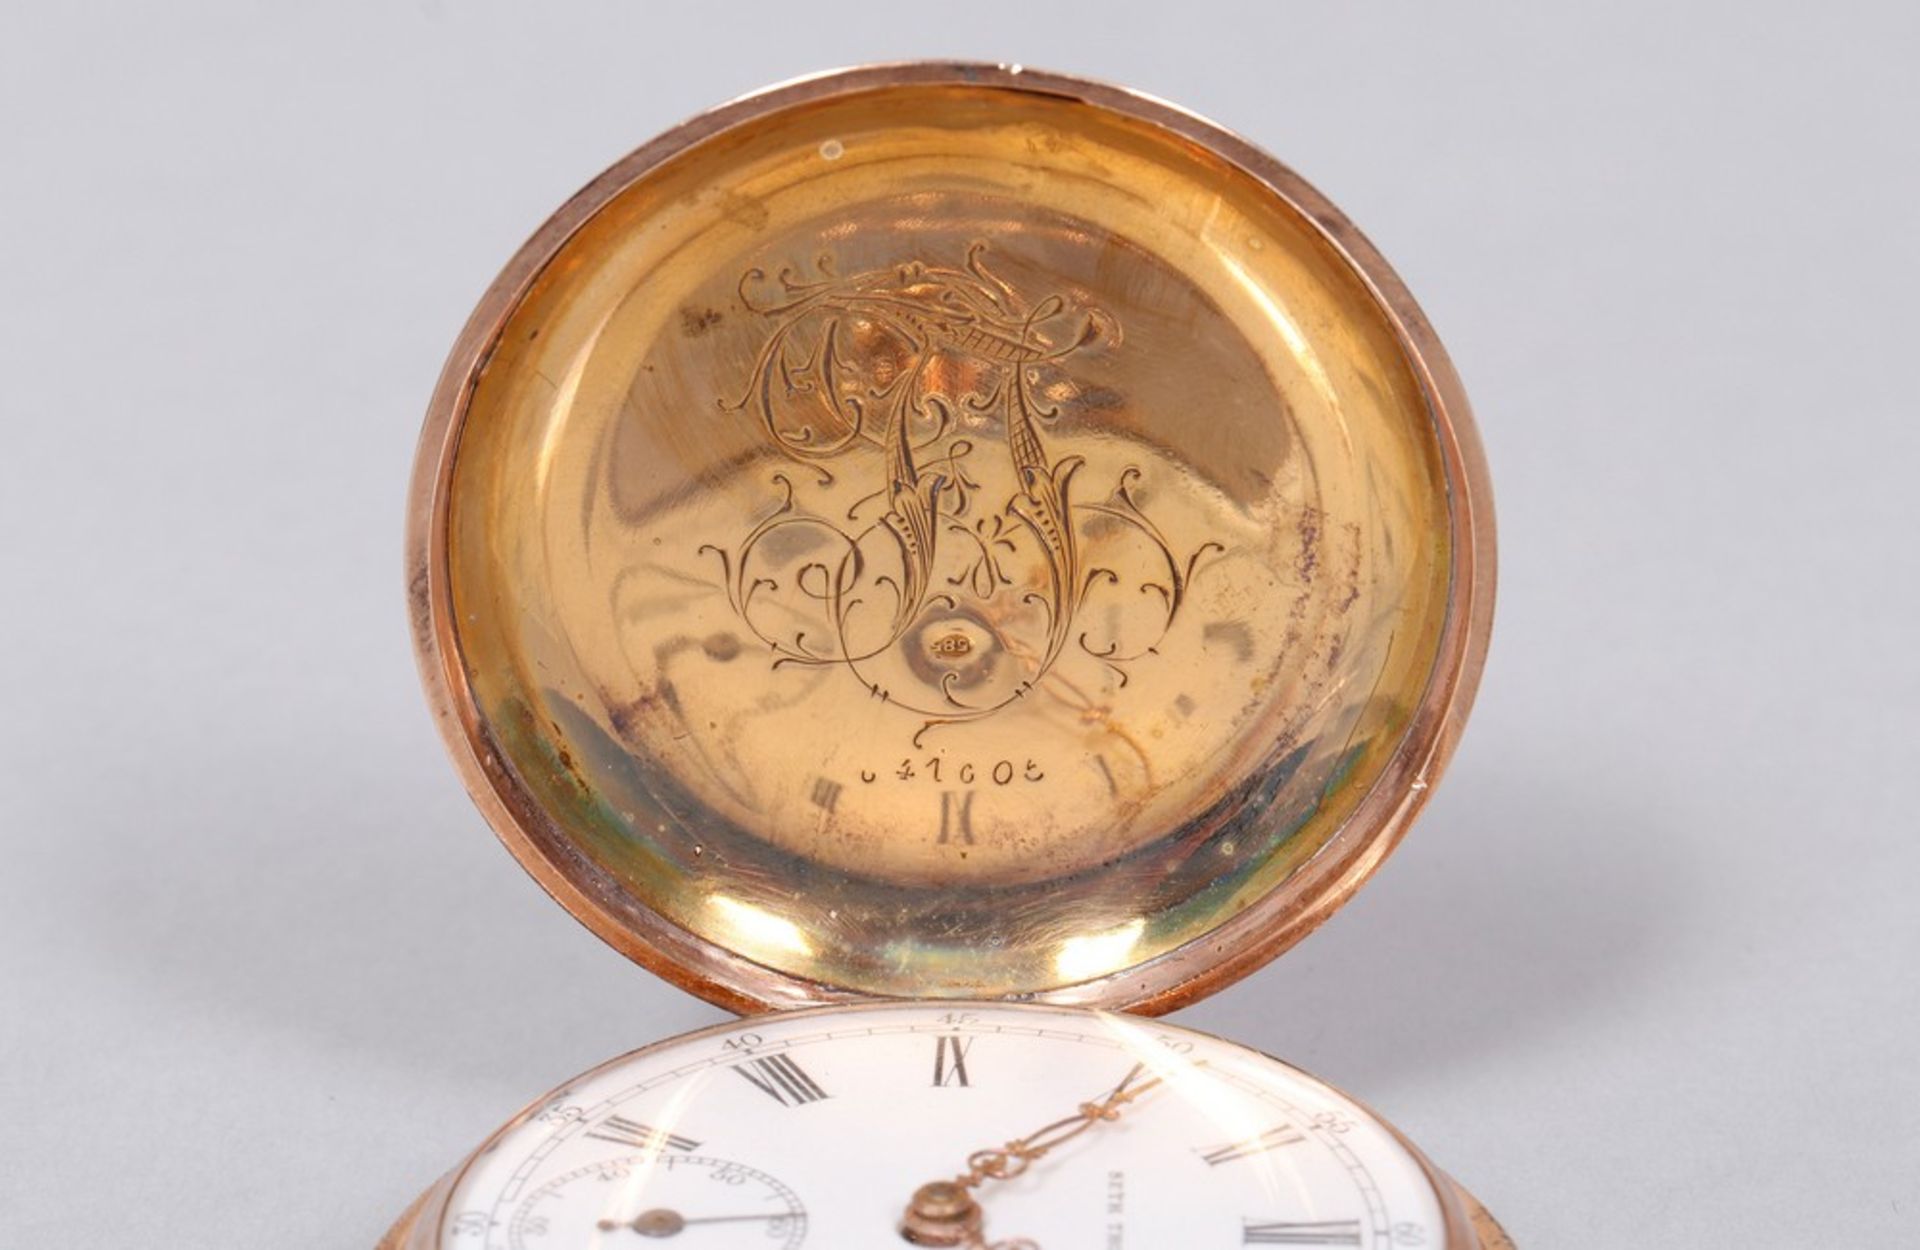 Very rare American pocket watch from 1894, Seth Thomas, Thomaston, Conn., made of 585 gold - Image 3 of 8